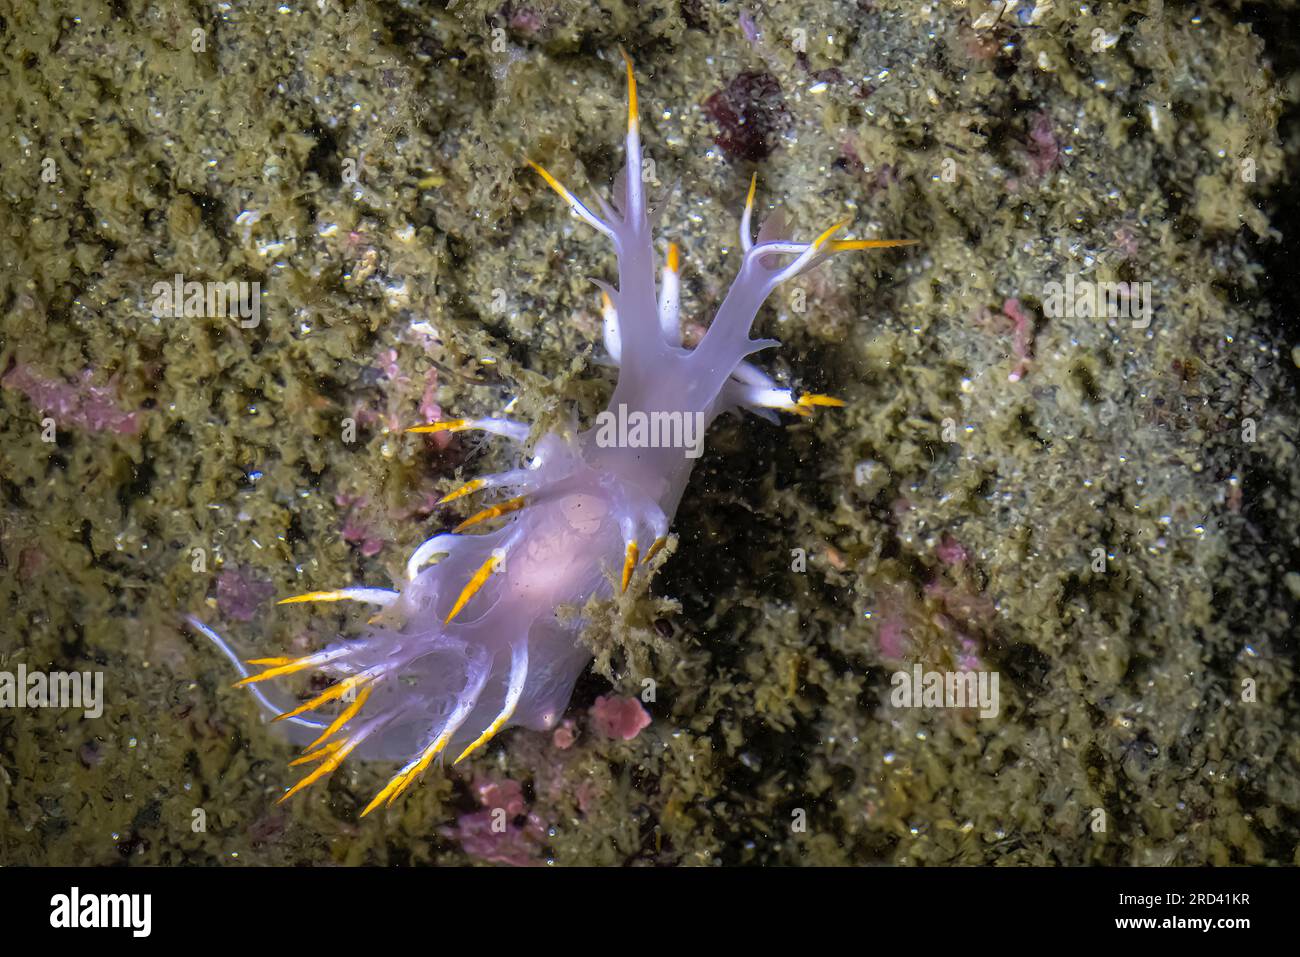 White Dendronotid, Dendronotus albus, feeding on a hydroid in a tide pool at Point of Arches, Olympic National Park, Washington State, USA Stock Photo